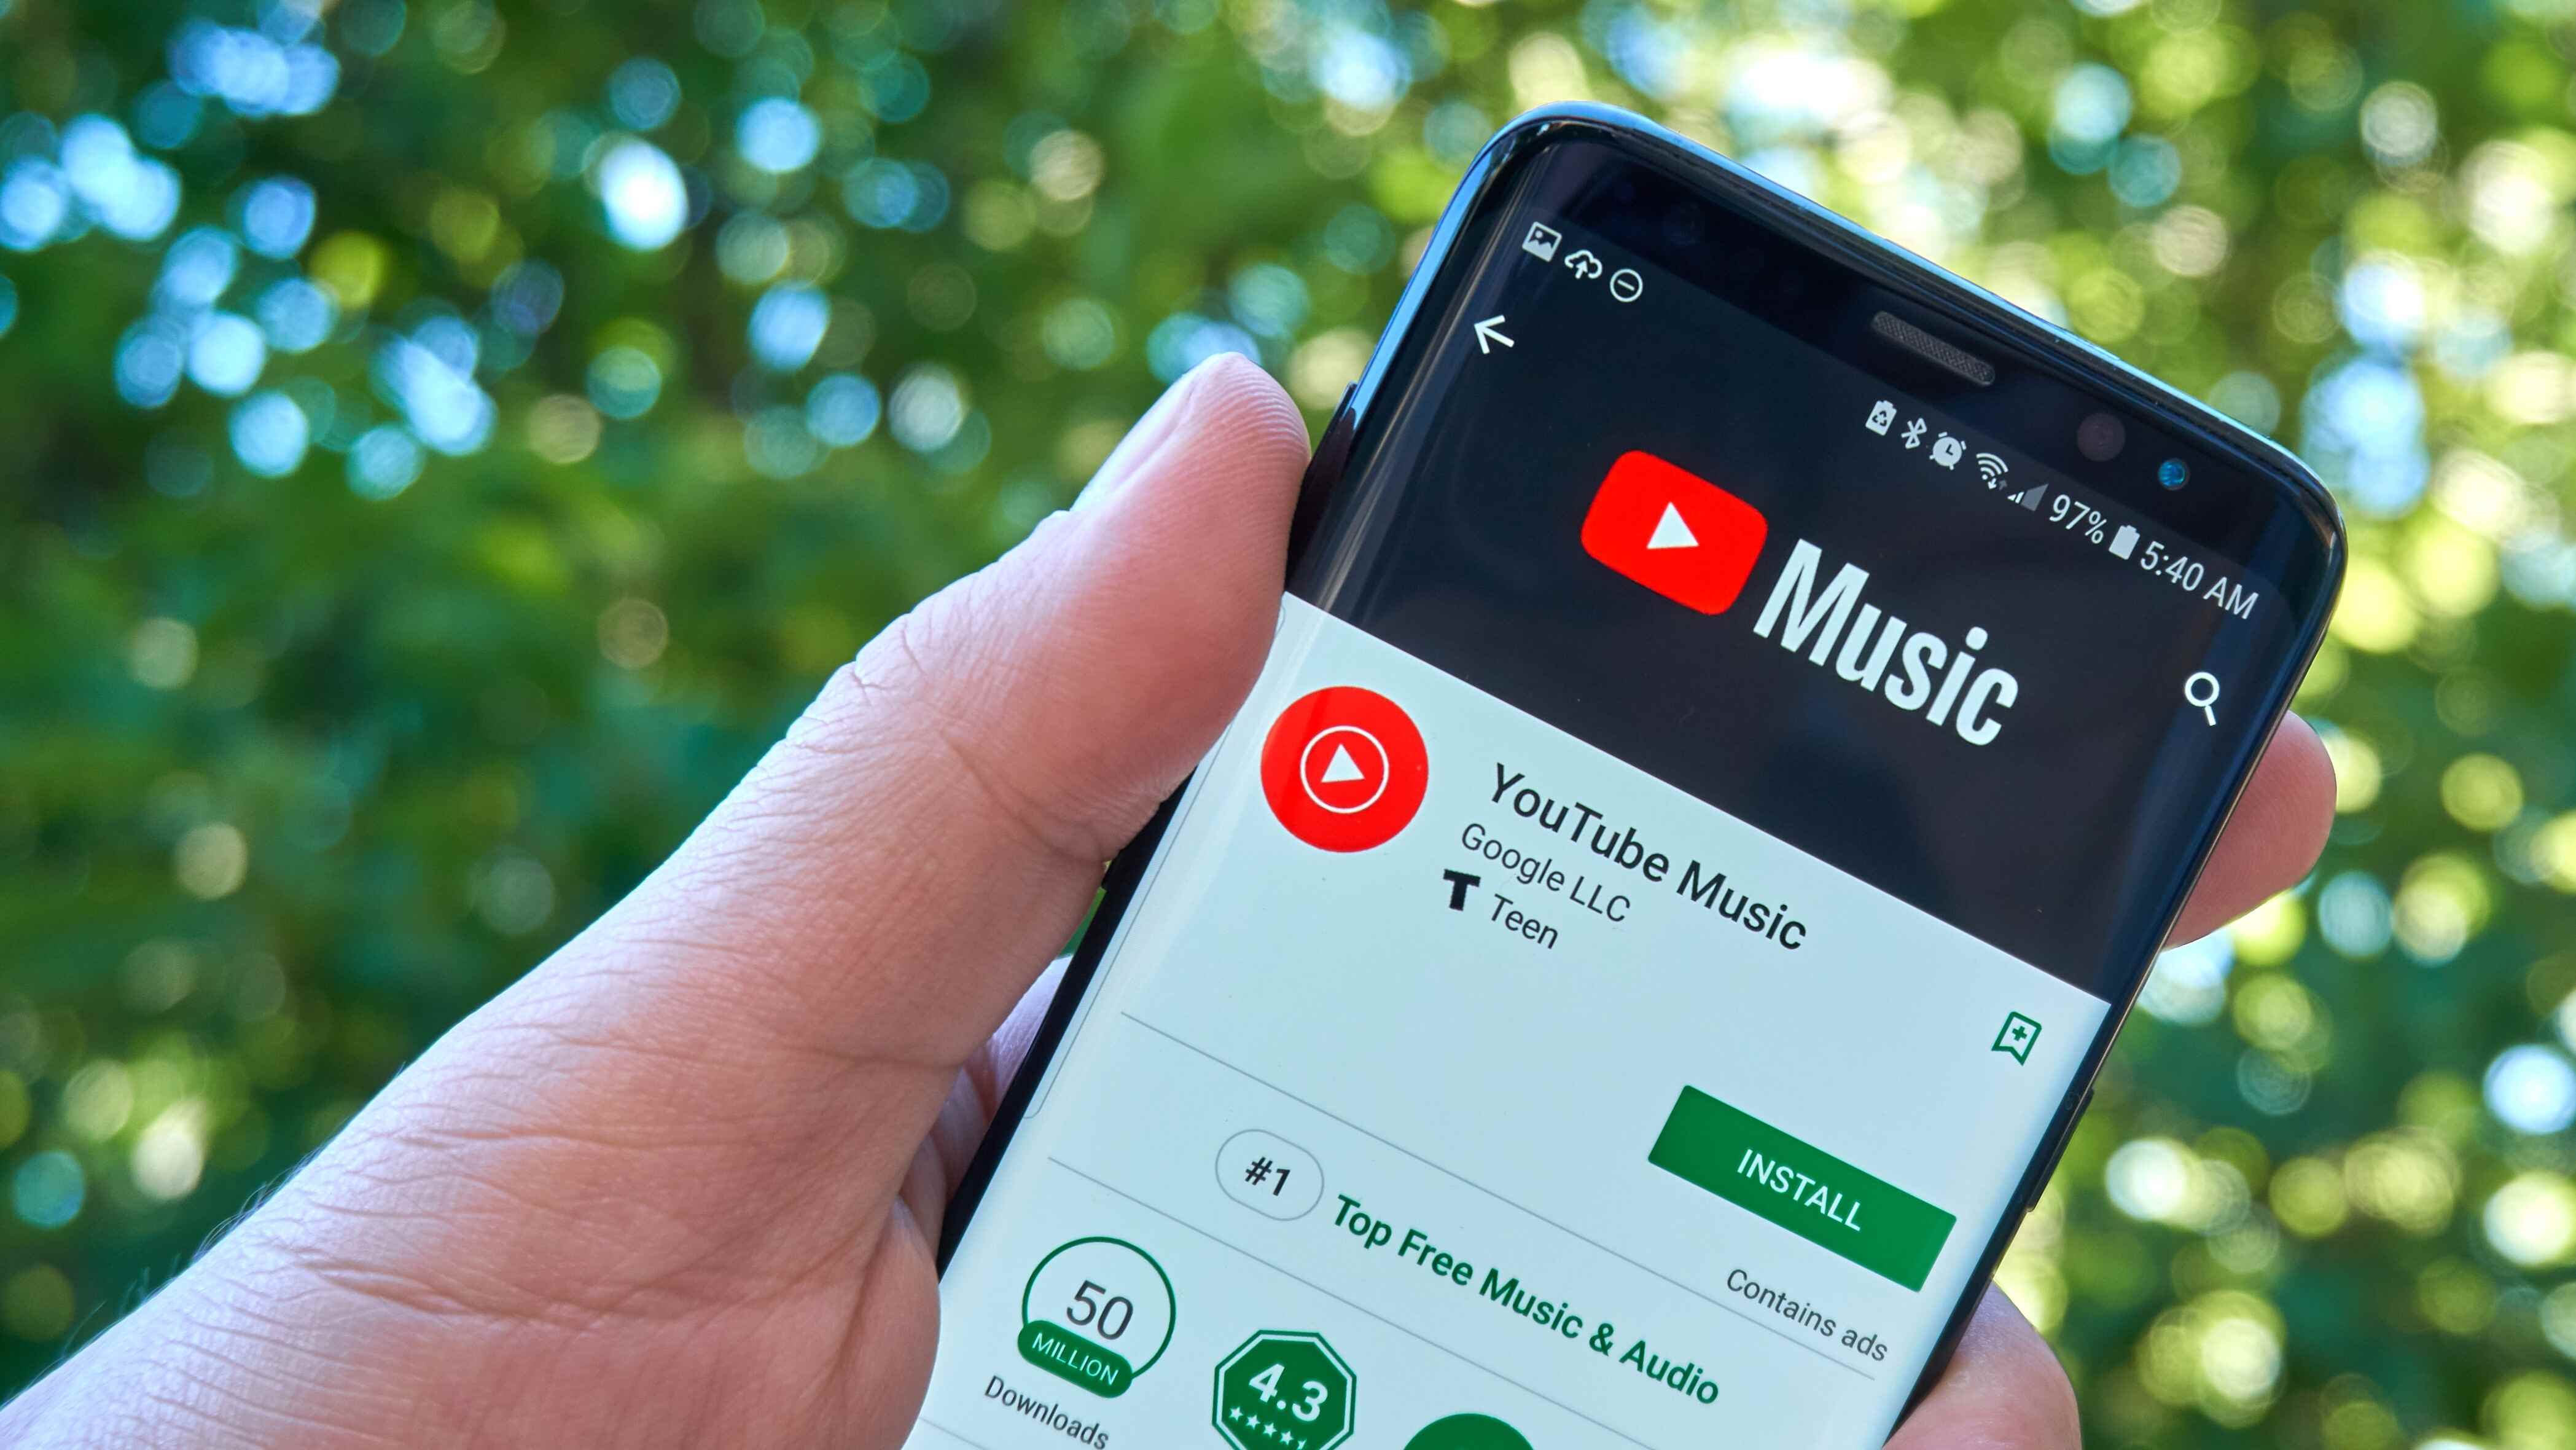 How To Download Music From Youtube To Smartphone | Robots.net